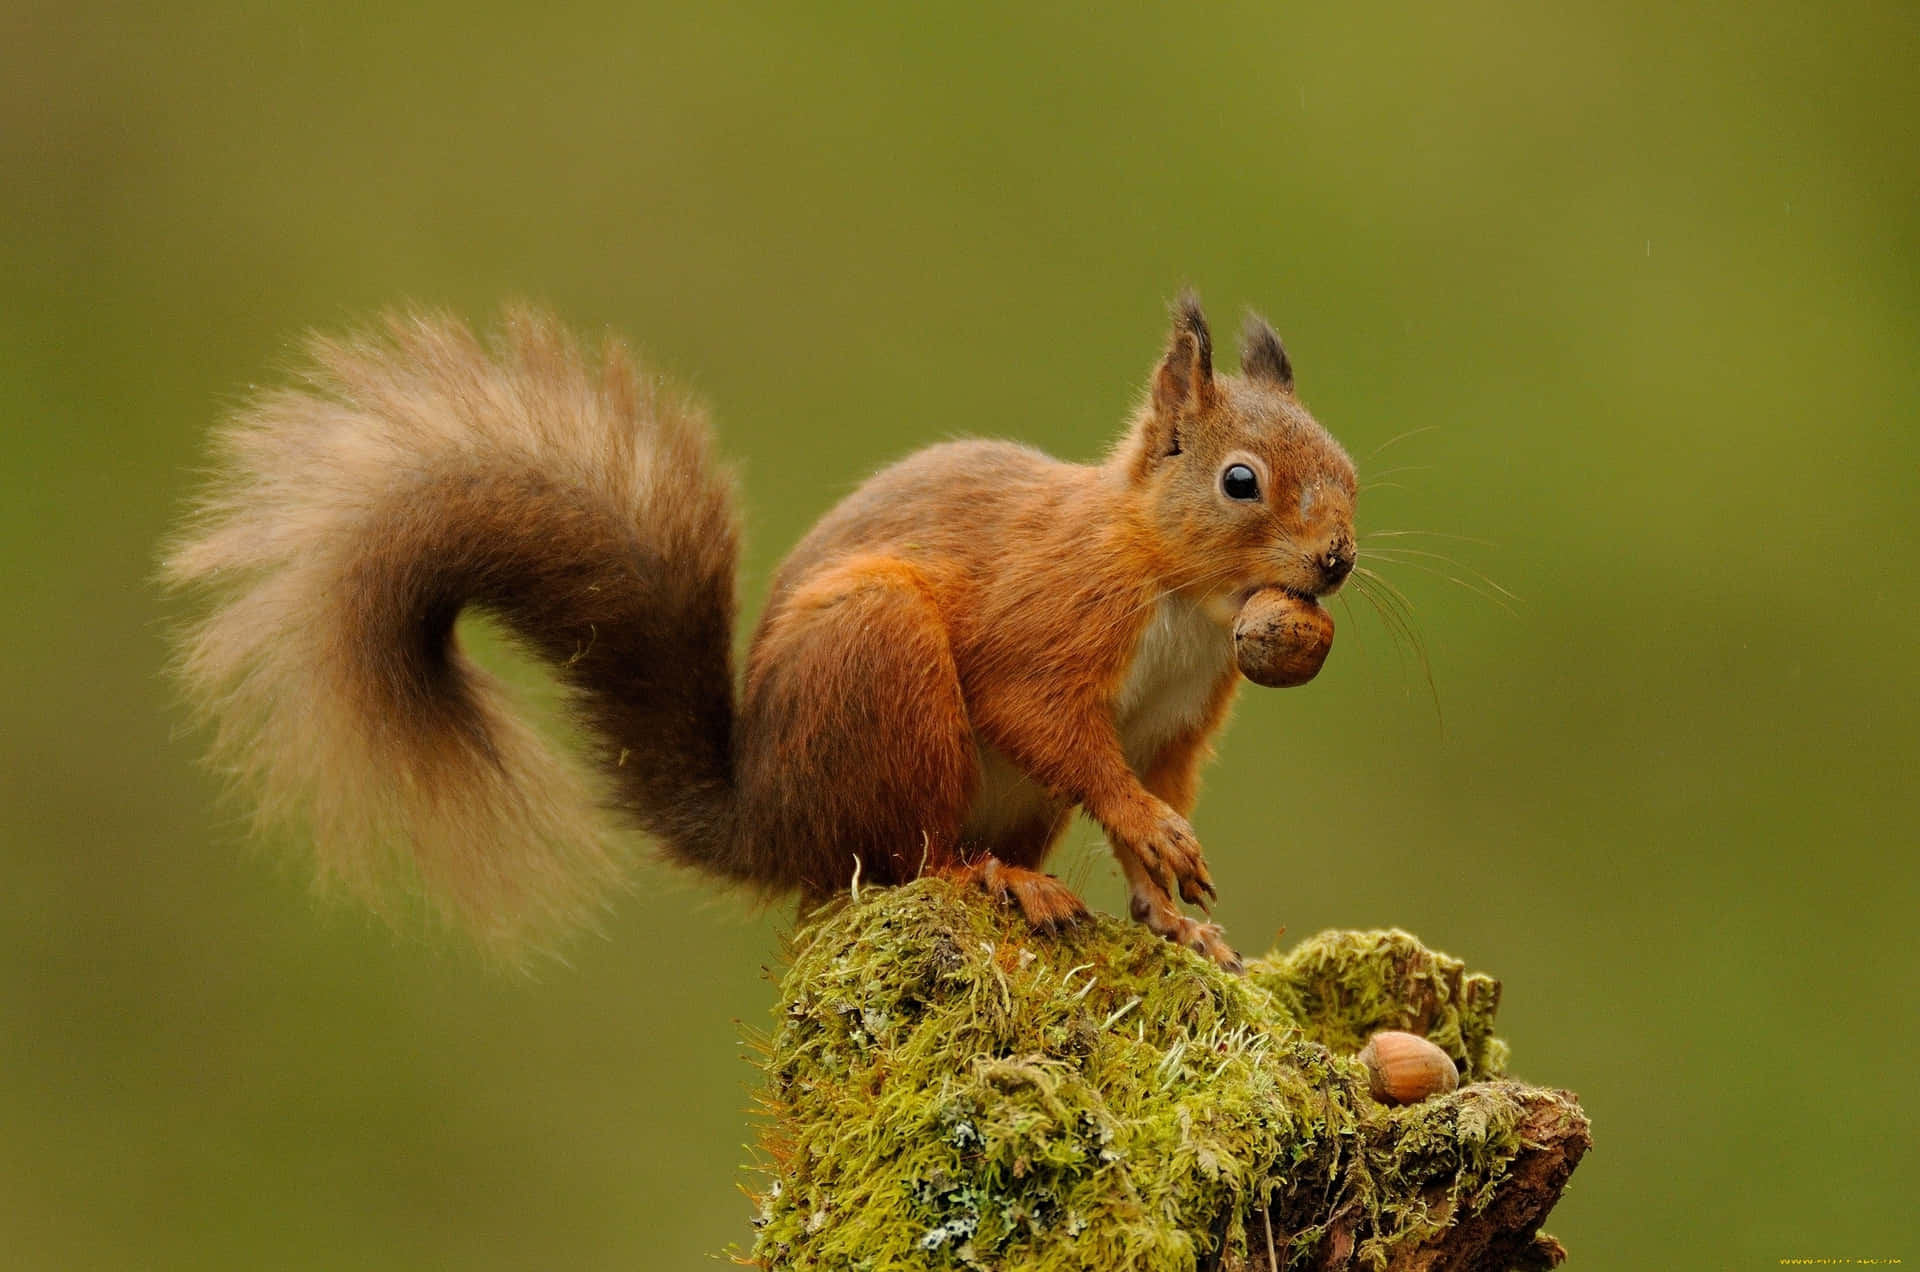 Vibrant Wilderness - Close-up Of A Squirrel In Nature